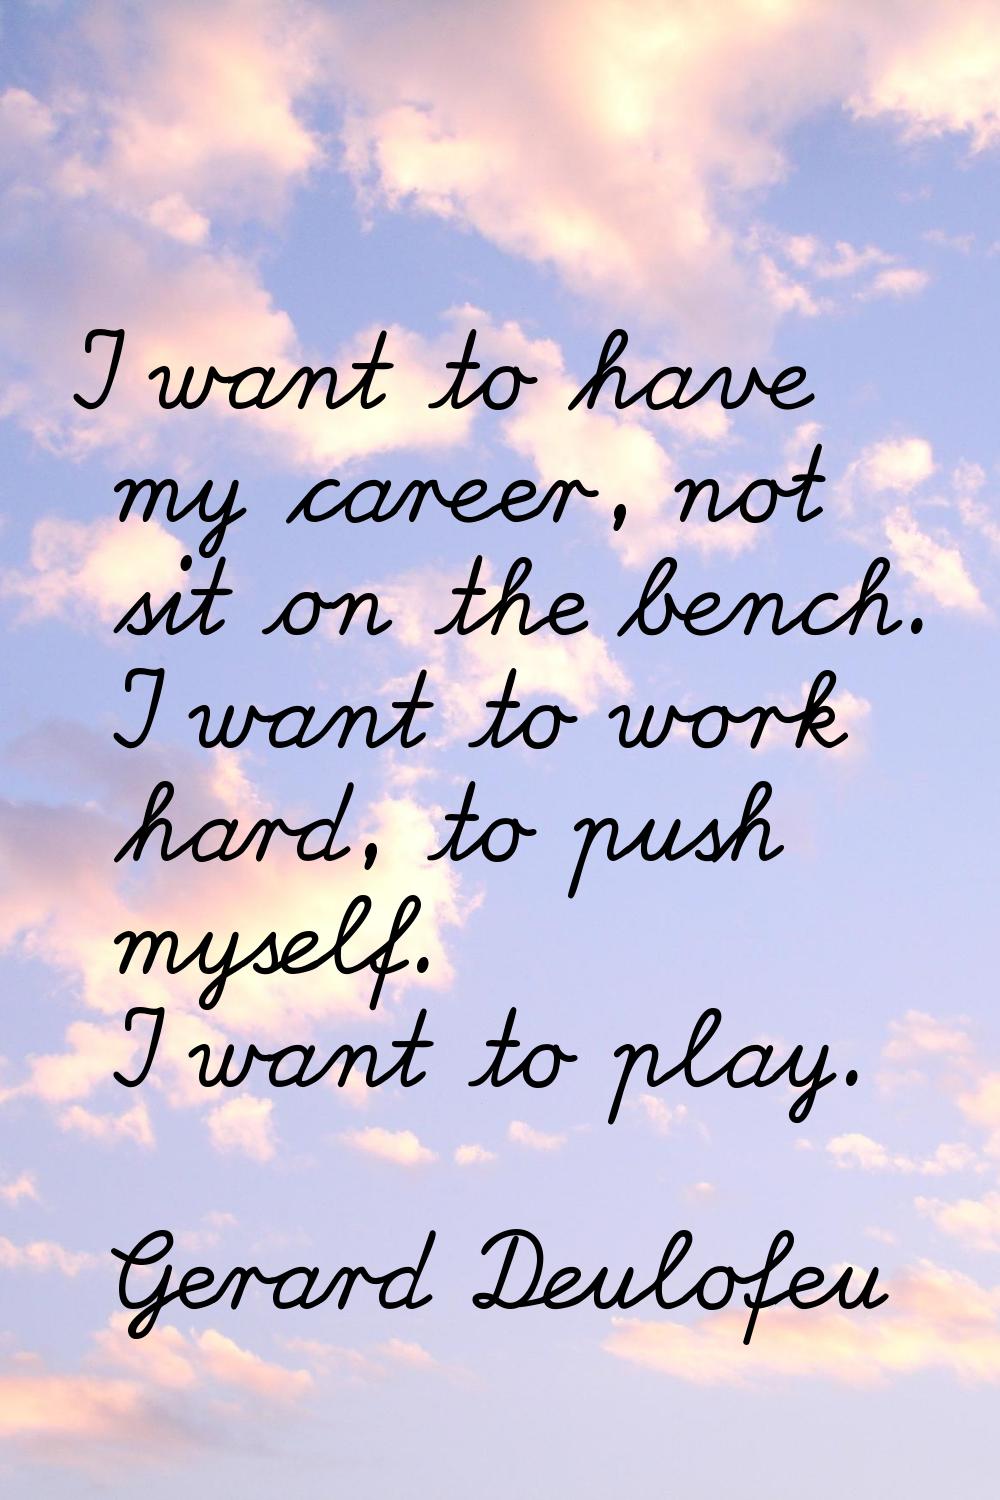 I want to have my career, not sit on the bench. I want to work hard, to push myself. I want to play